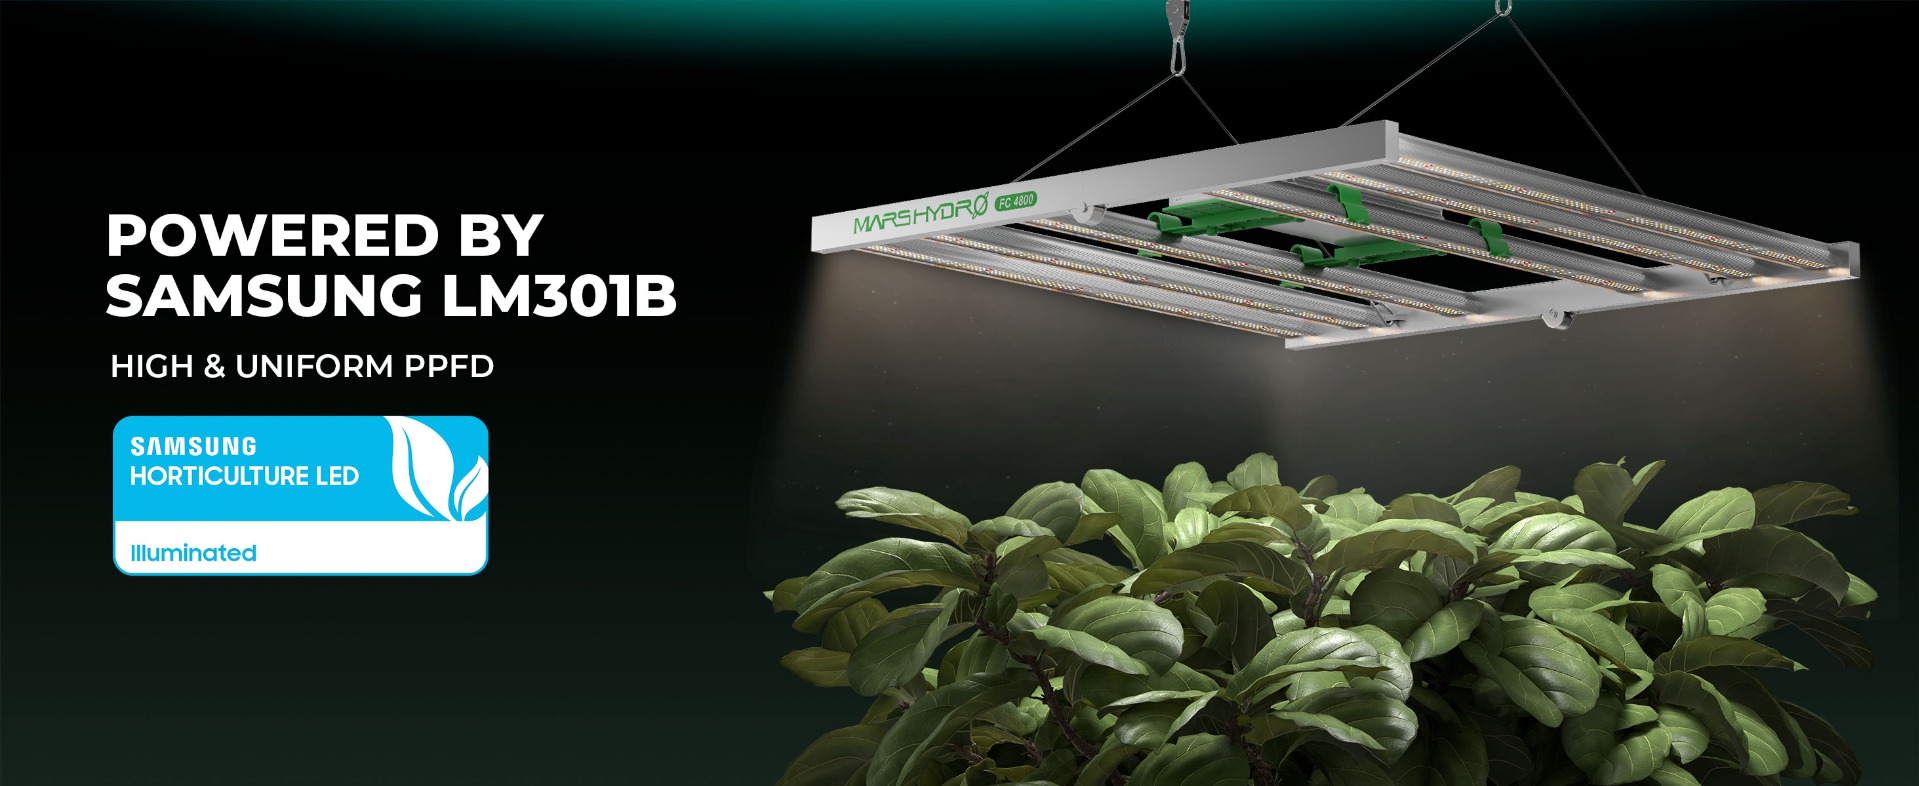 Mars Hydro Smart FC4800 LED Grow Light, more convenient to control on phone